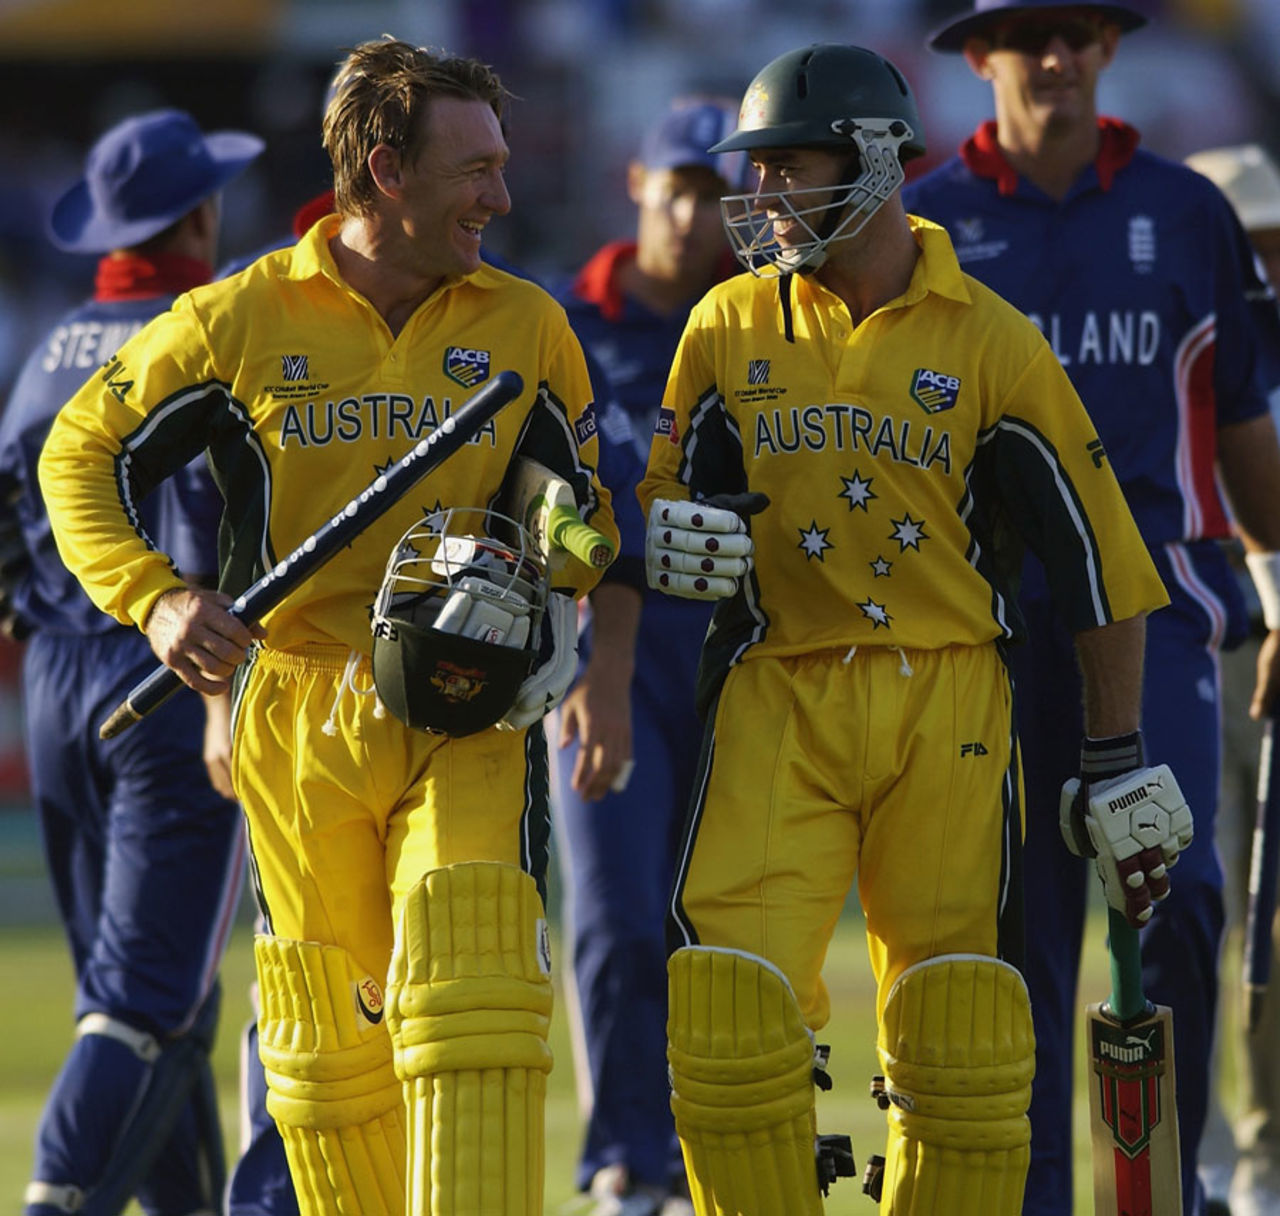 PORT ELIZABETH - MARCH 2: Michael Bevan(R) and Andy Bichel of Australia walks off at the end of the ICC Cricket World Cup 2003, Pool A match between Australia and England at St George's Park, Port Elizabeth, South Africa on March 2, 2003.